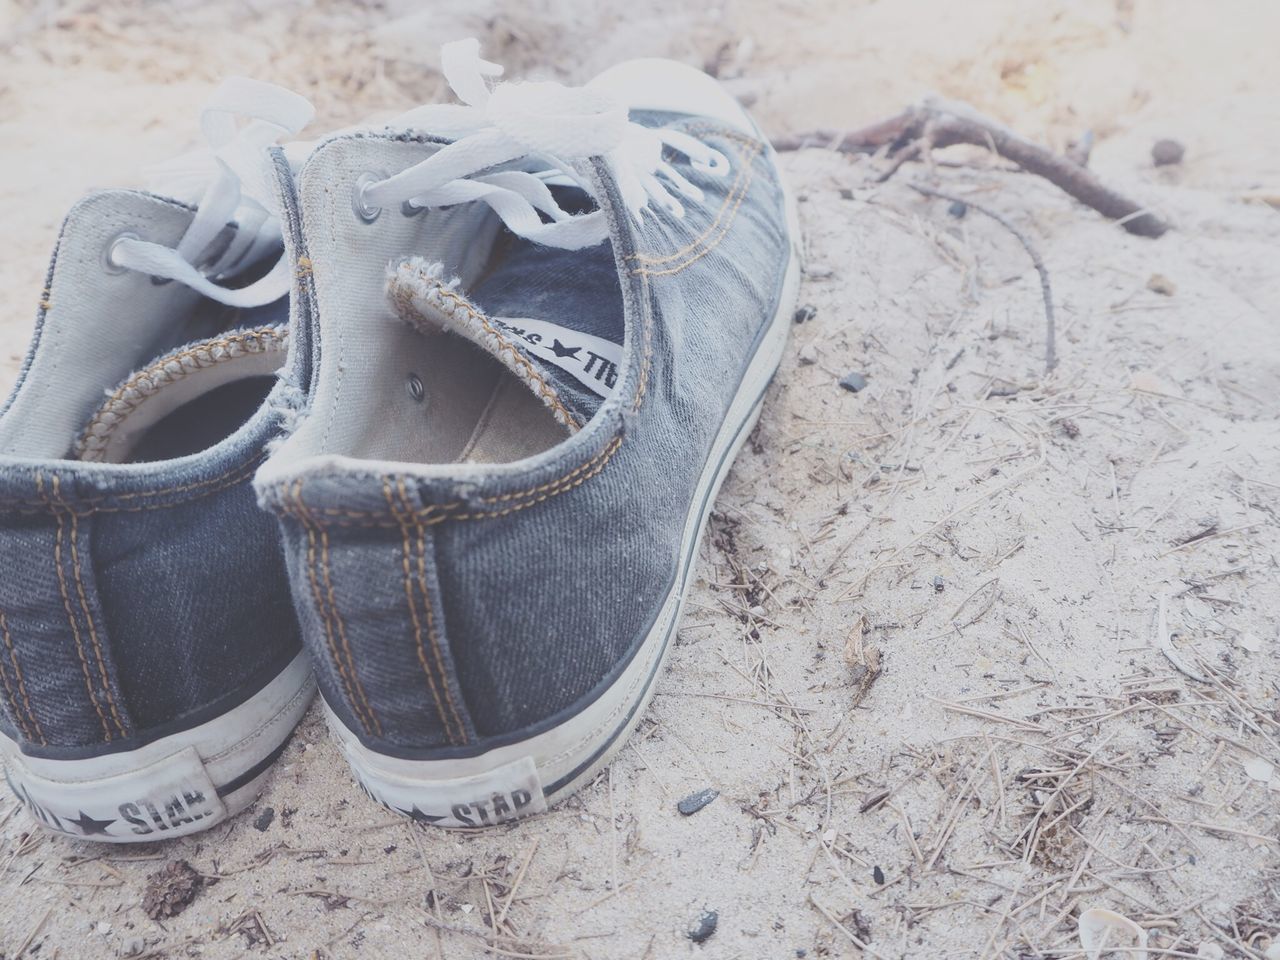 close-up, sand, high angle view, metal, day, outdoors, shoe, abandoned, no people, sunlight, damaged, old, protection, still life, beach, obsolete, text, focus on foreground, safety, metallic